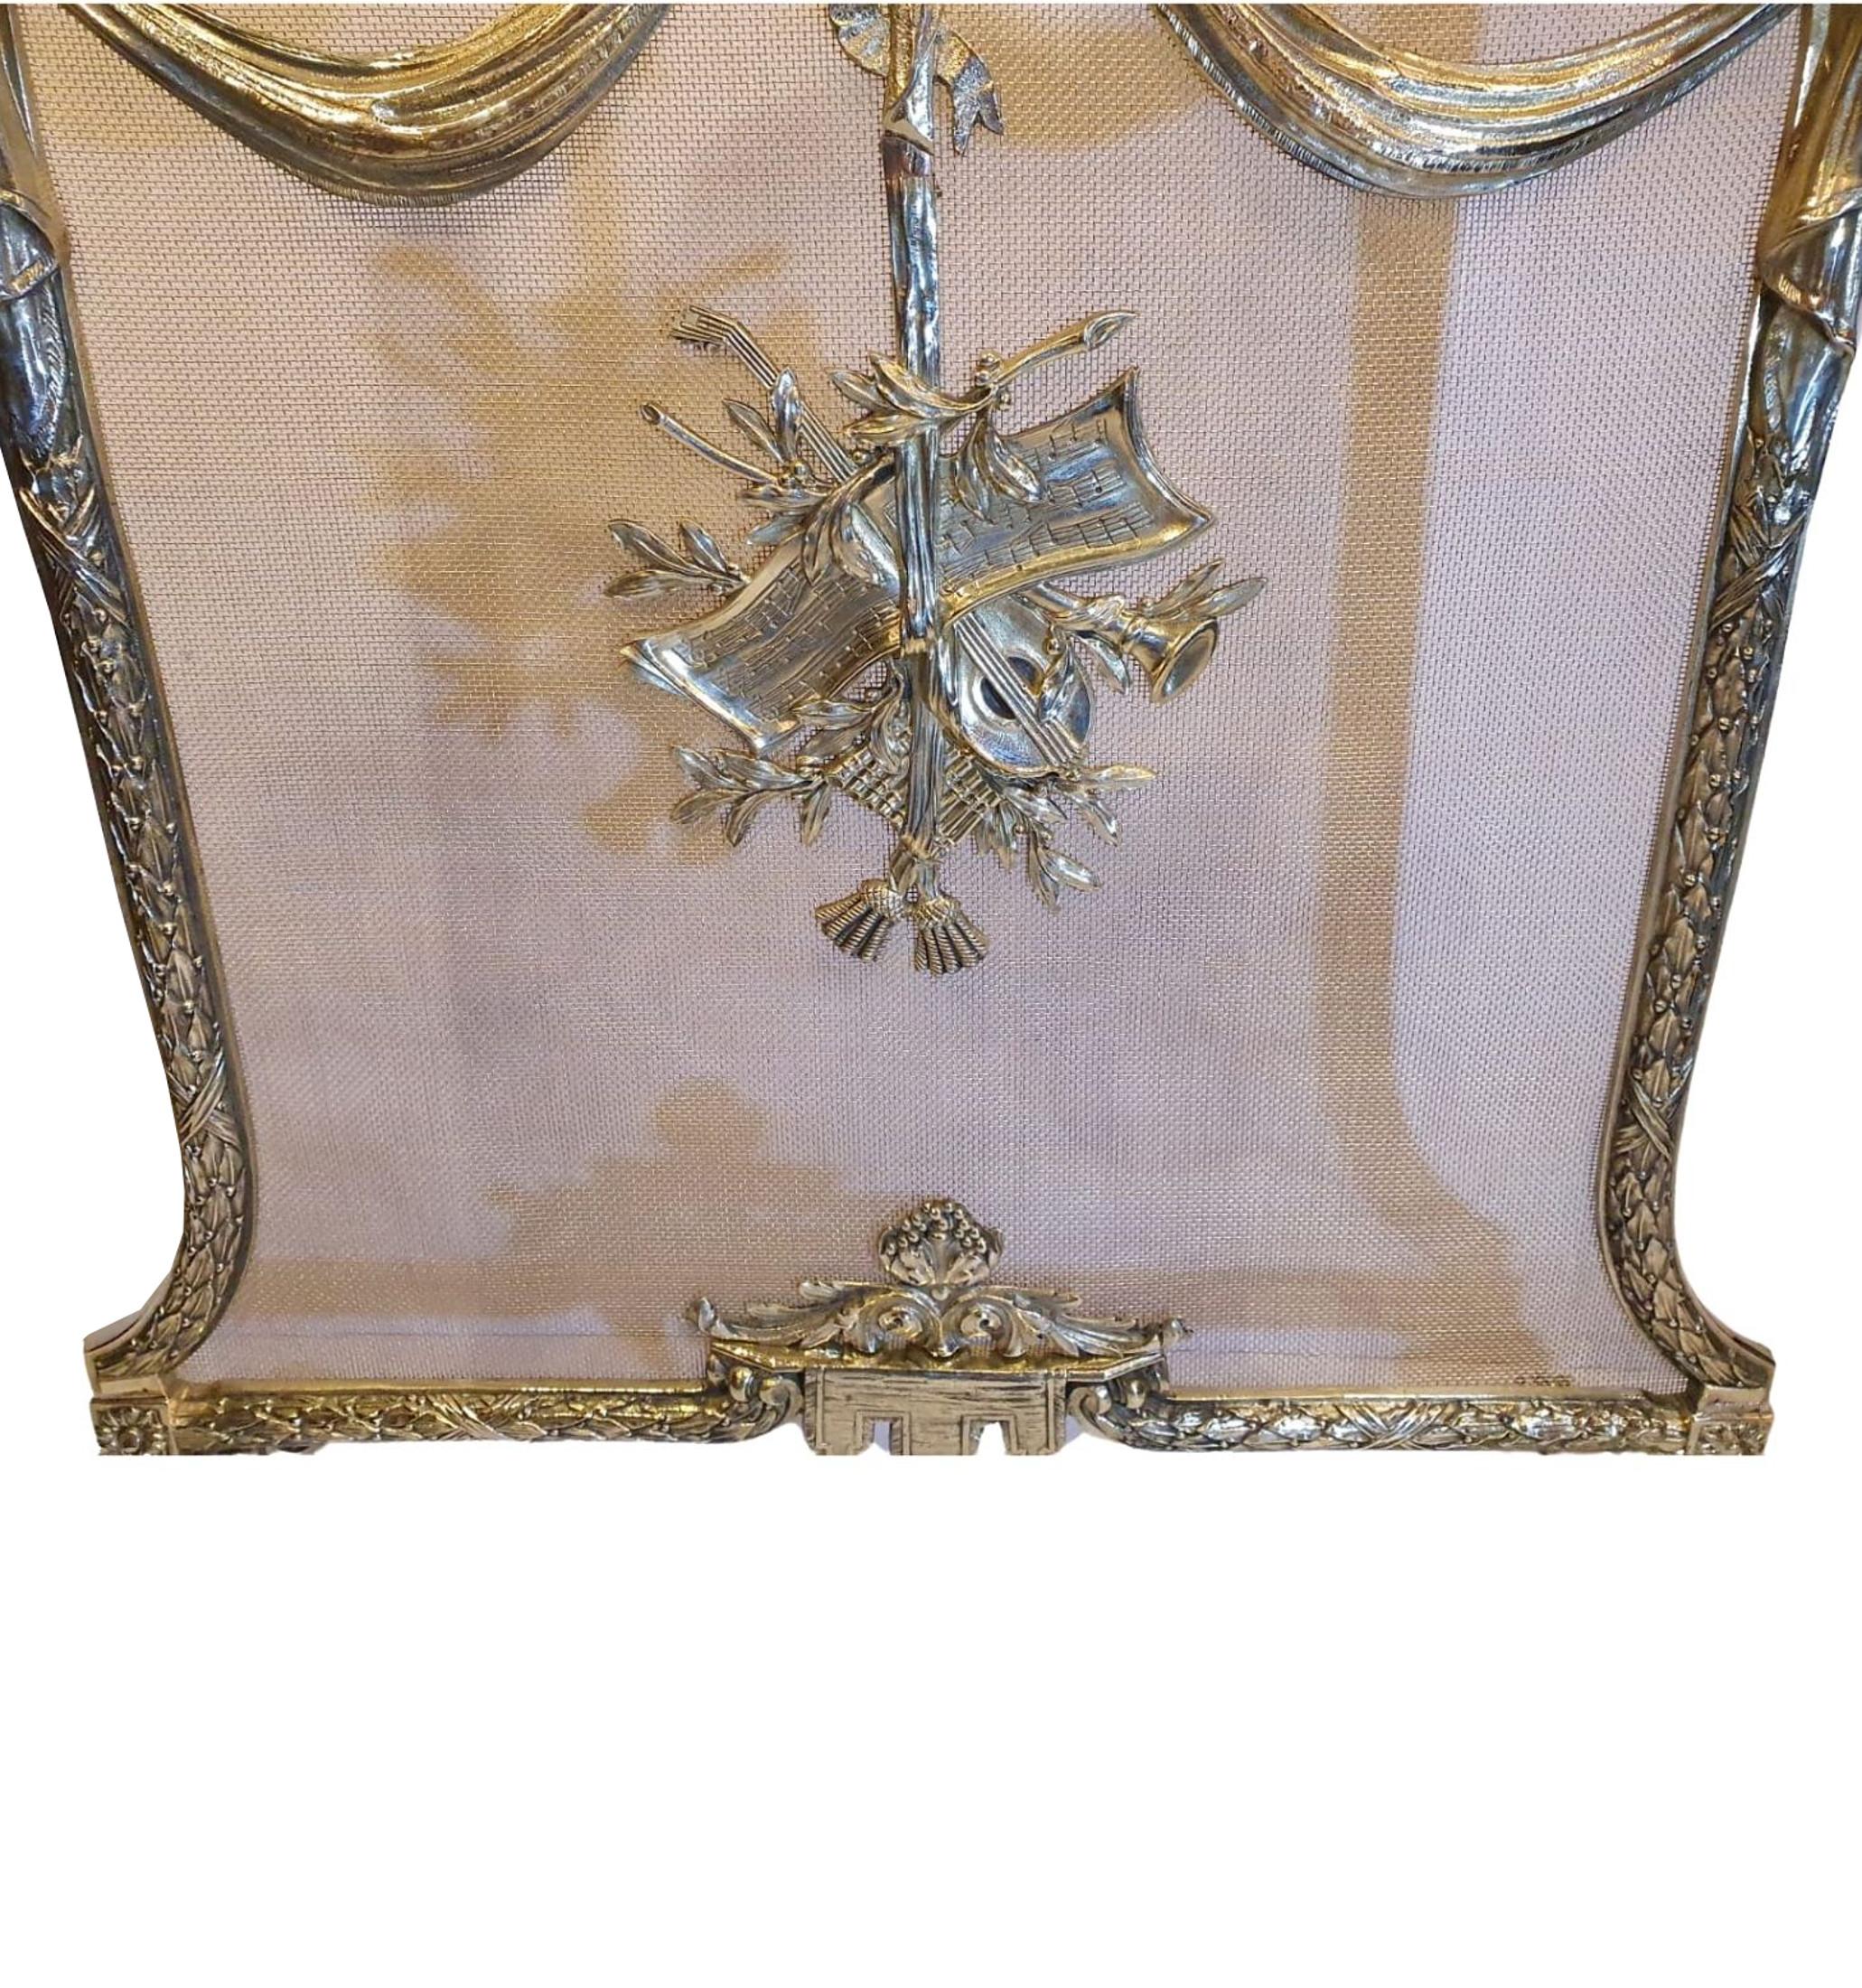 A stunning quality 19th century fully restored polished brass fire screen. The wire mesh of concave form with a beautifully cast frame with finials in the form of grapes and an elegant ribbon bow carrying handle. The wire mesh is adorned with